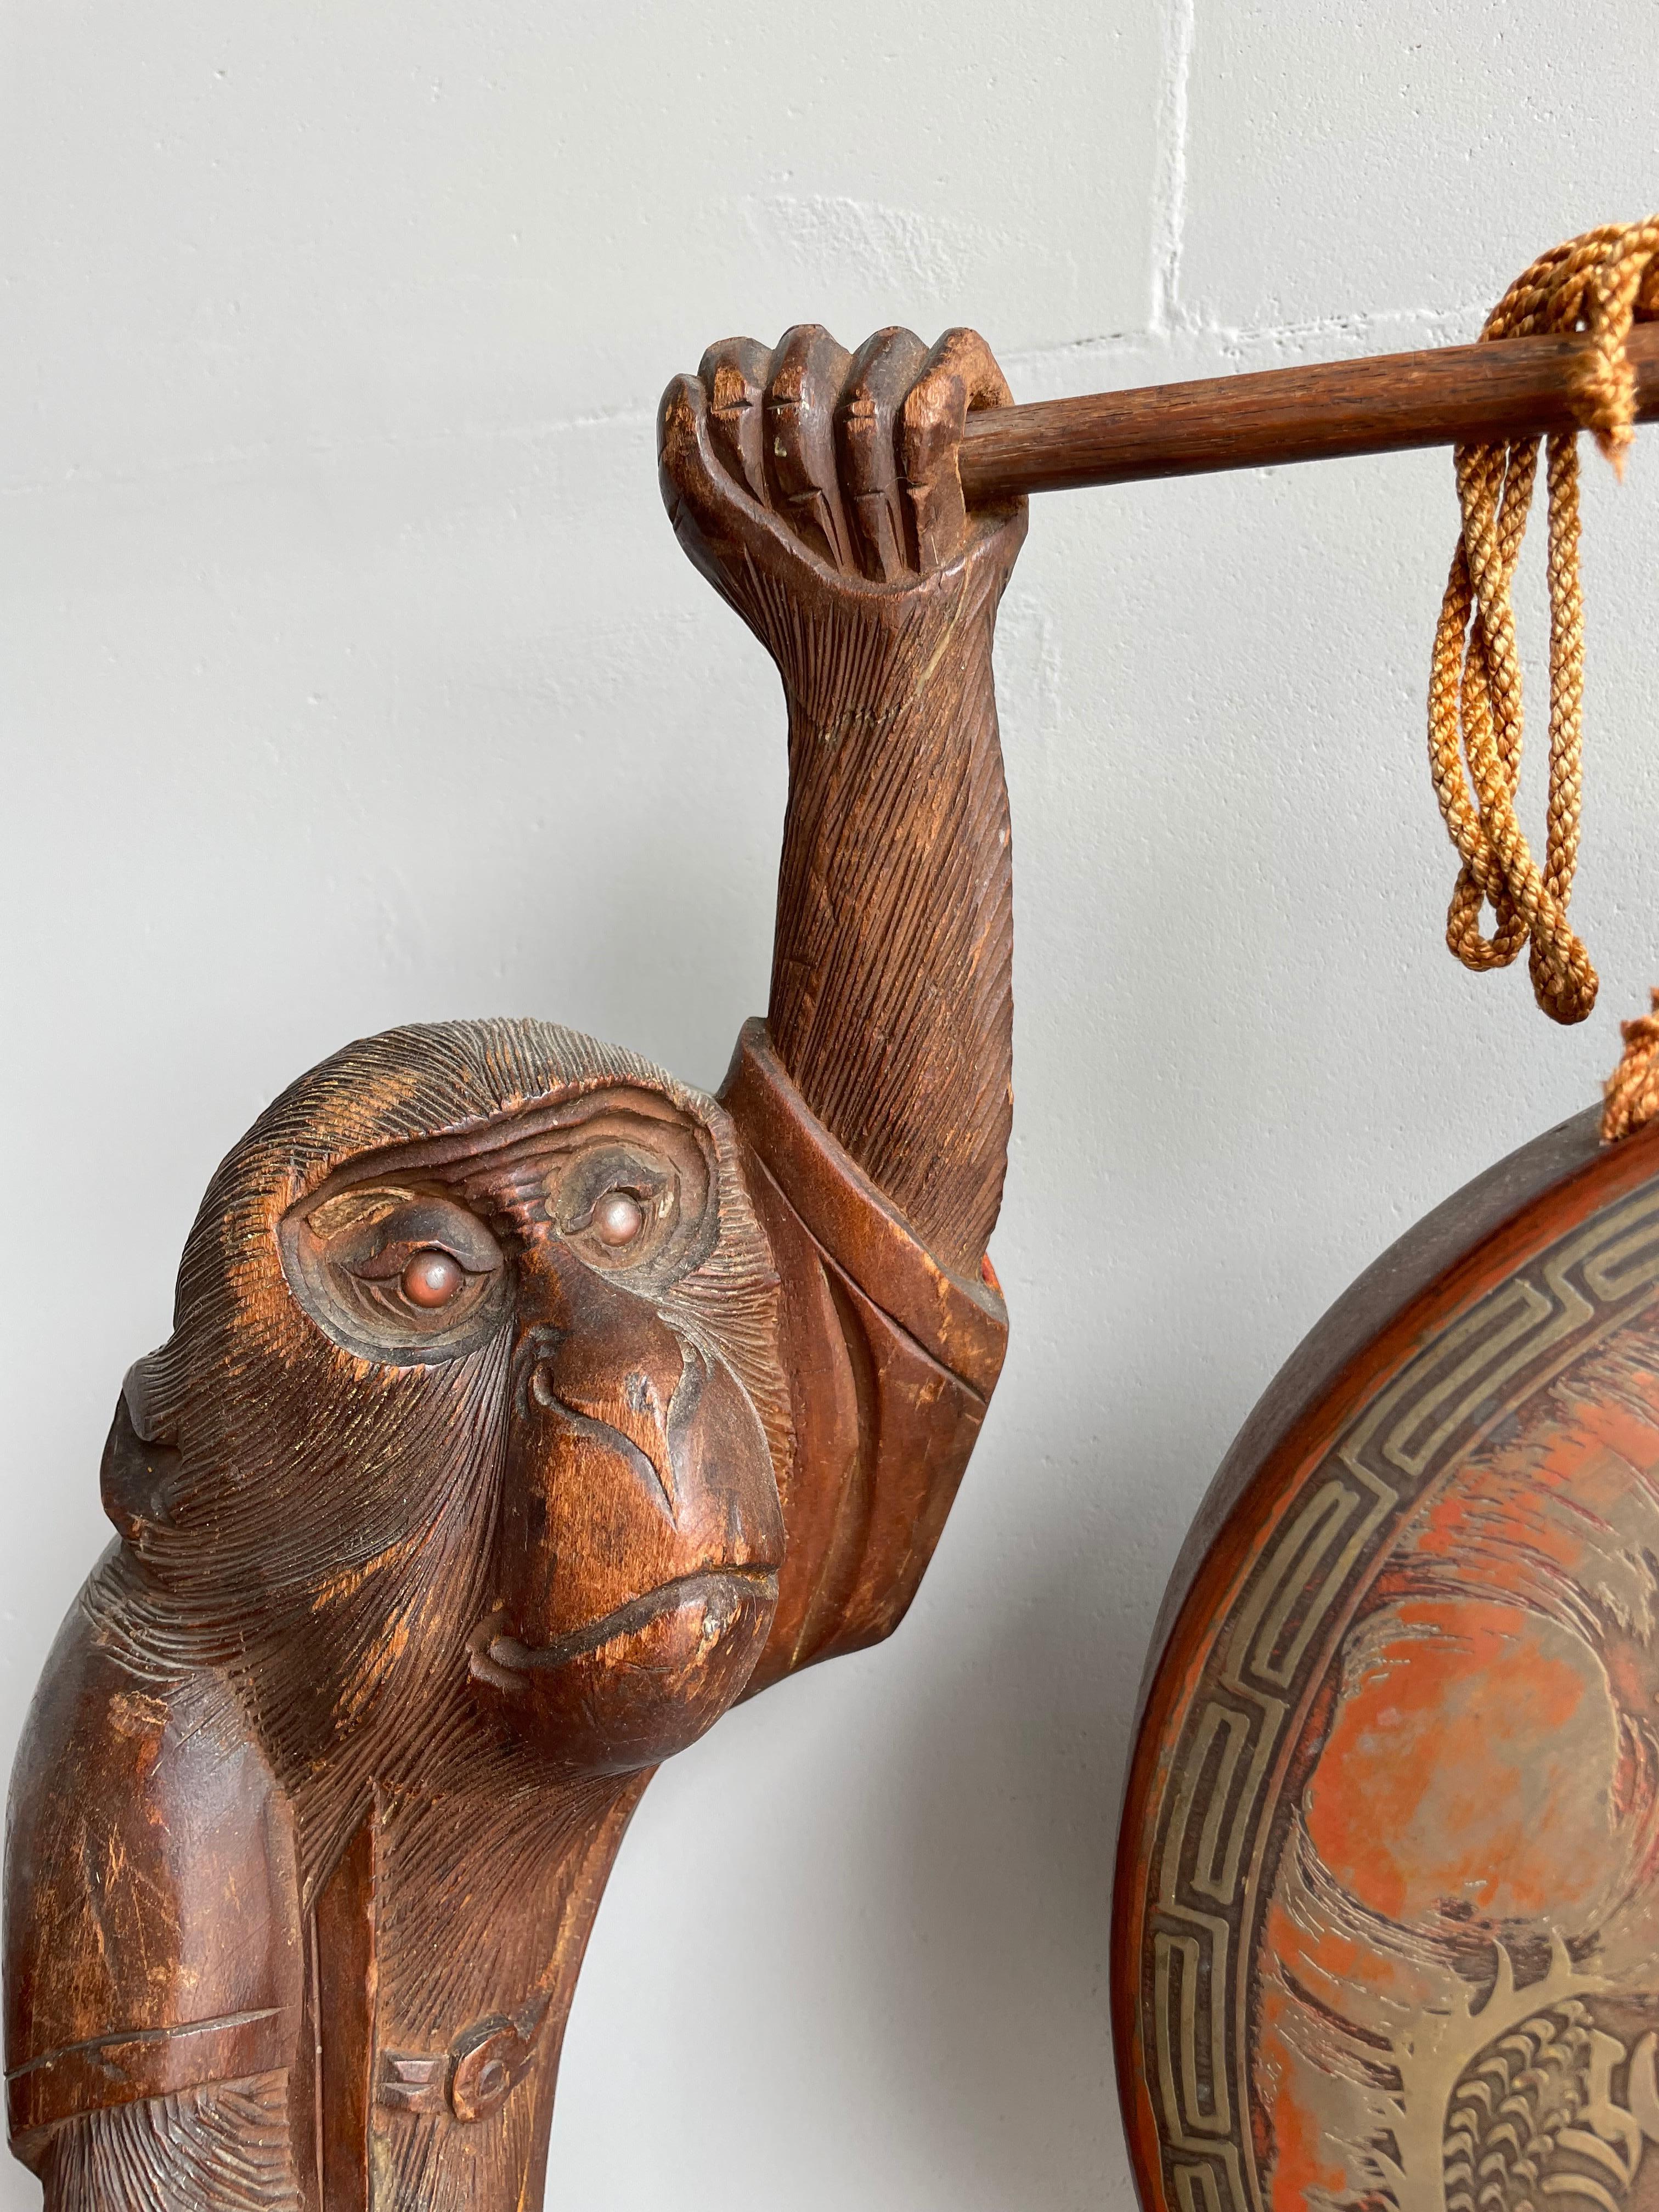 Chinese Export Antique Chinese Table Gong Held Up by Two Hand Carved Wooden Monkey Sculptures